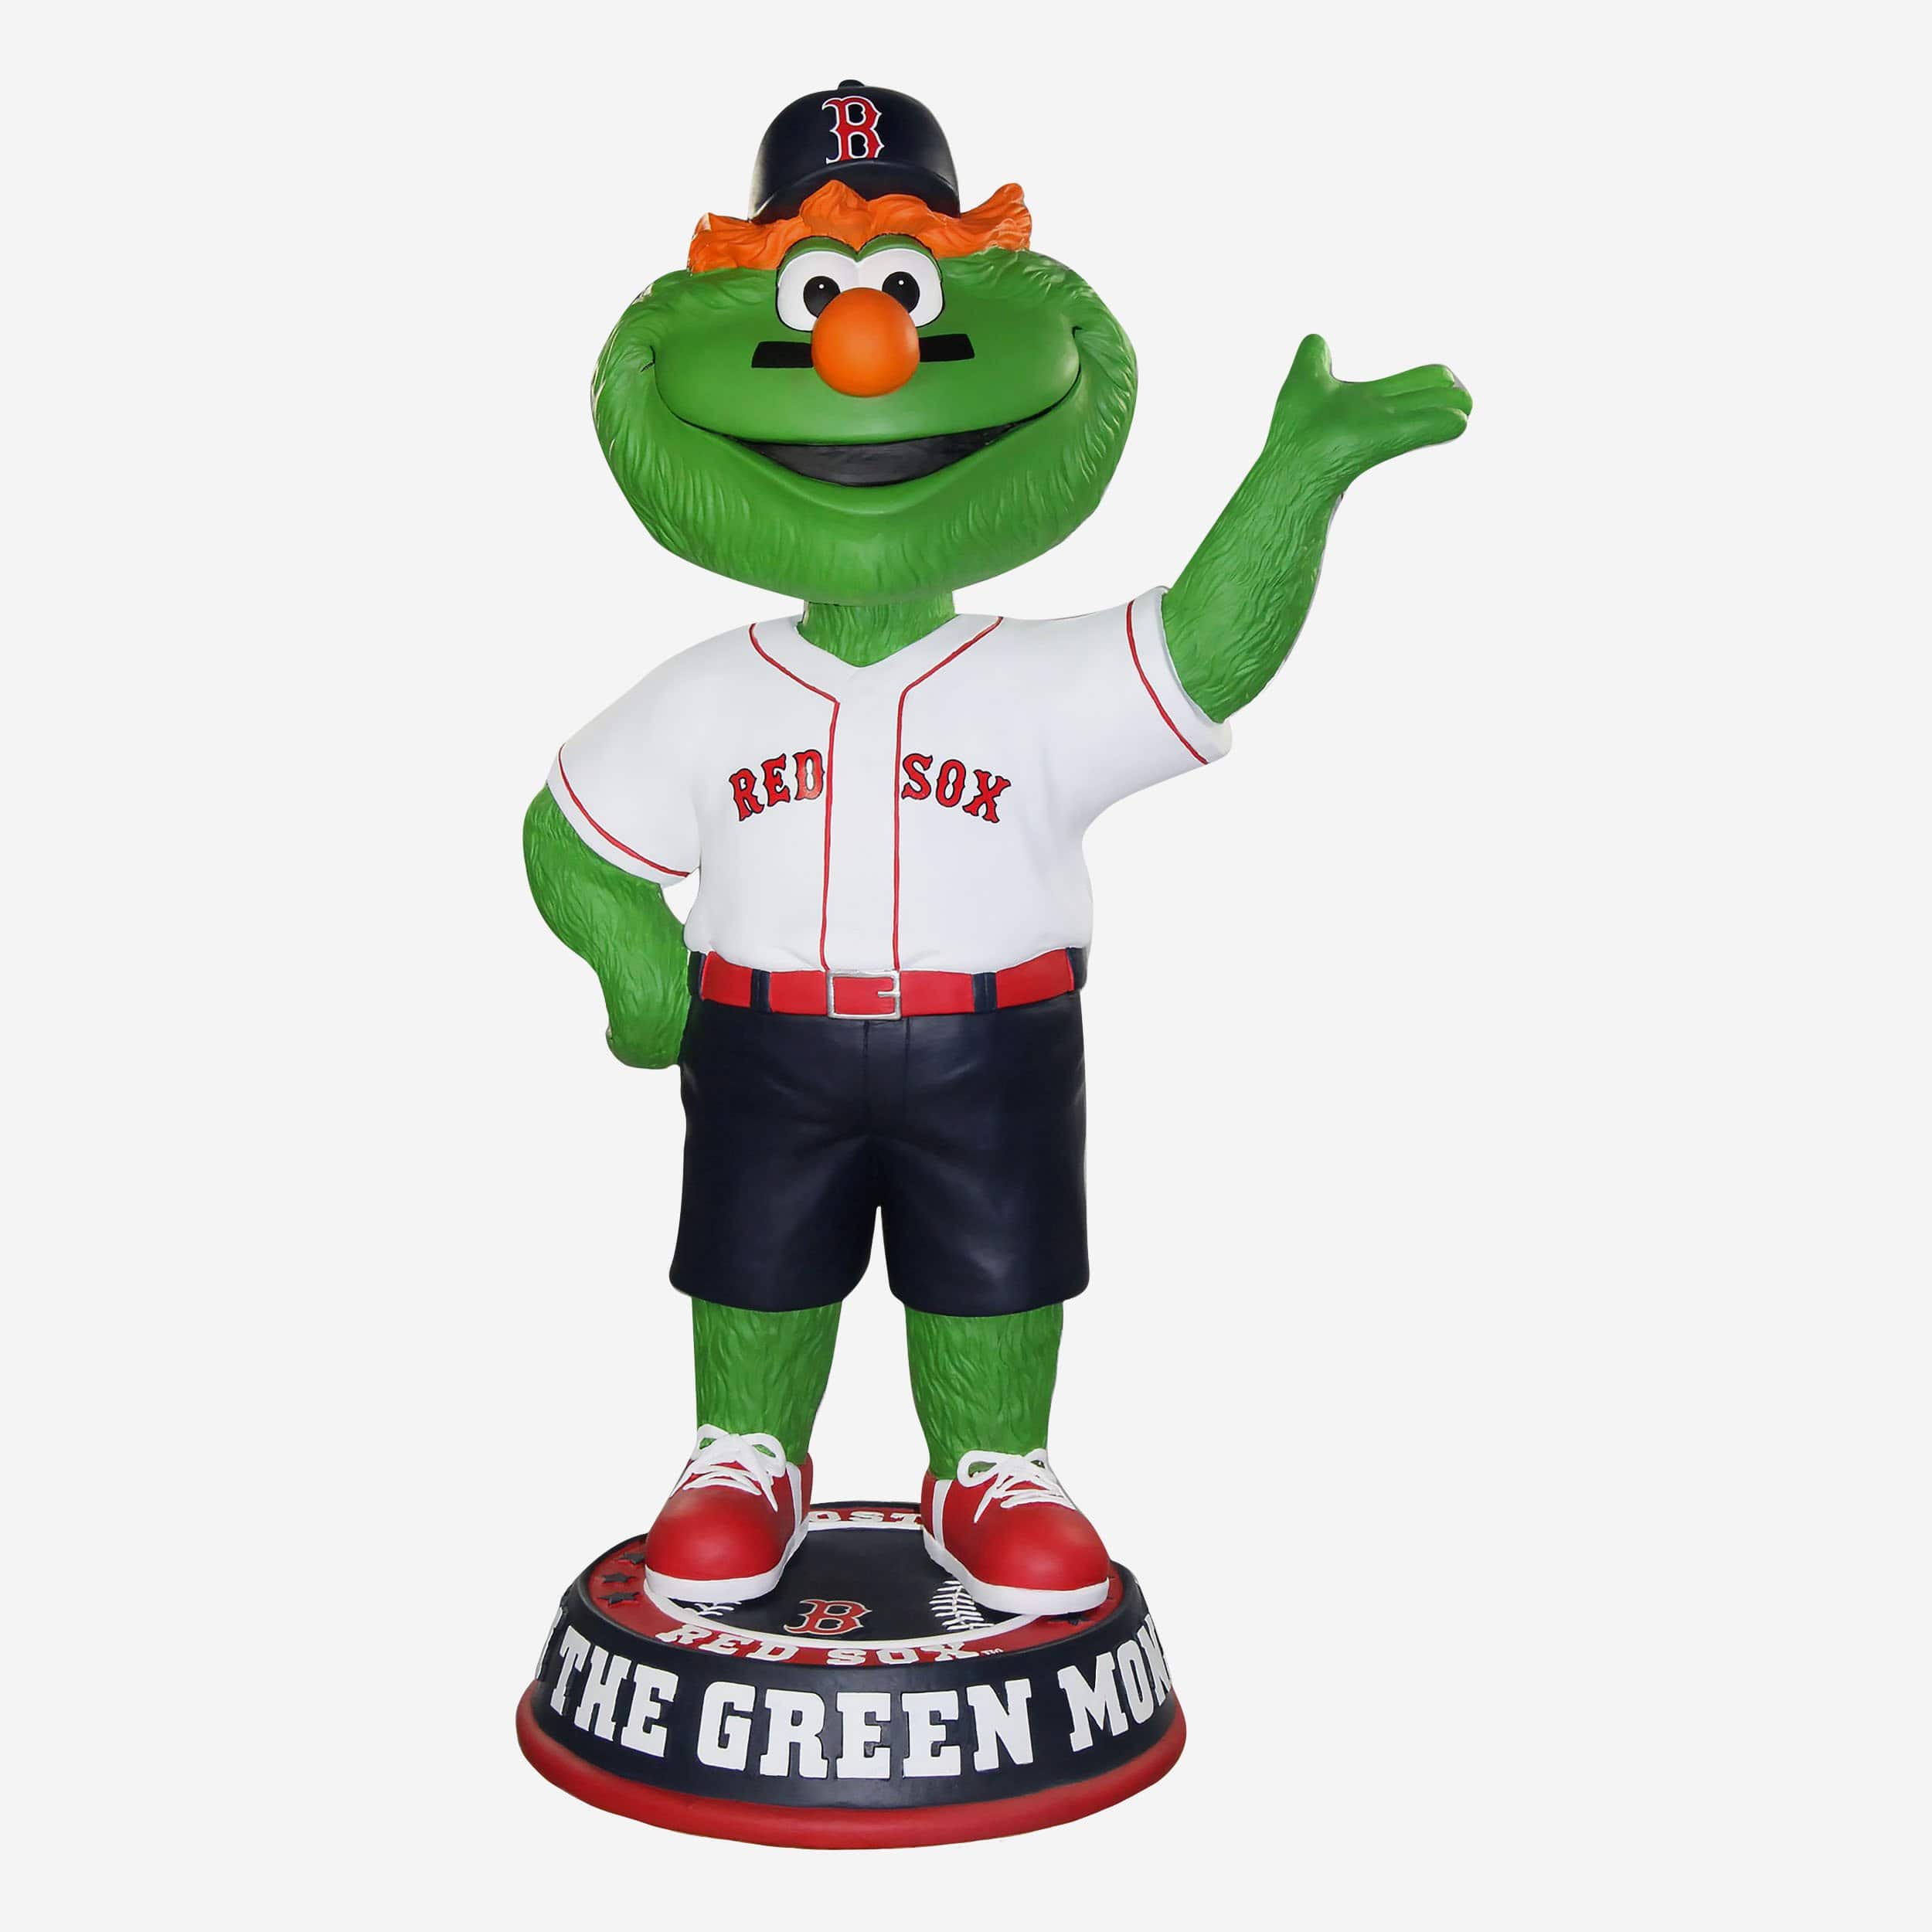 A New Boston Red Sox Mascot Will Tag Along With Wally The Green